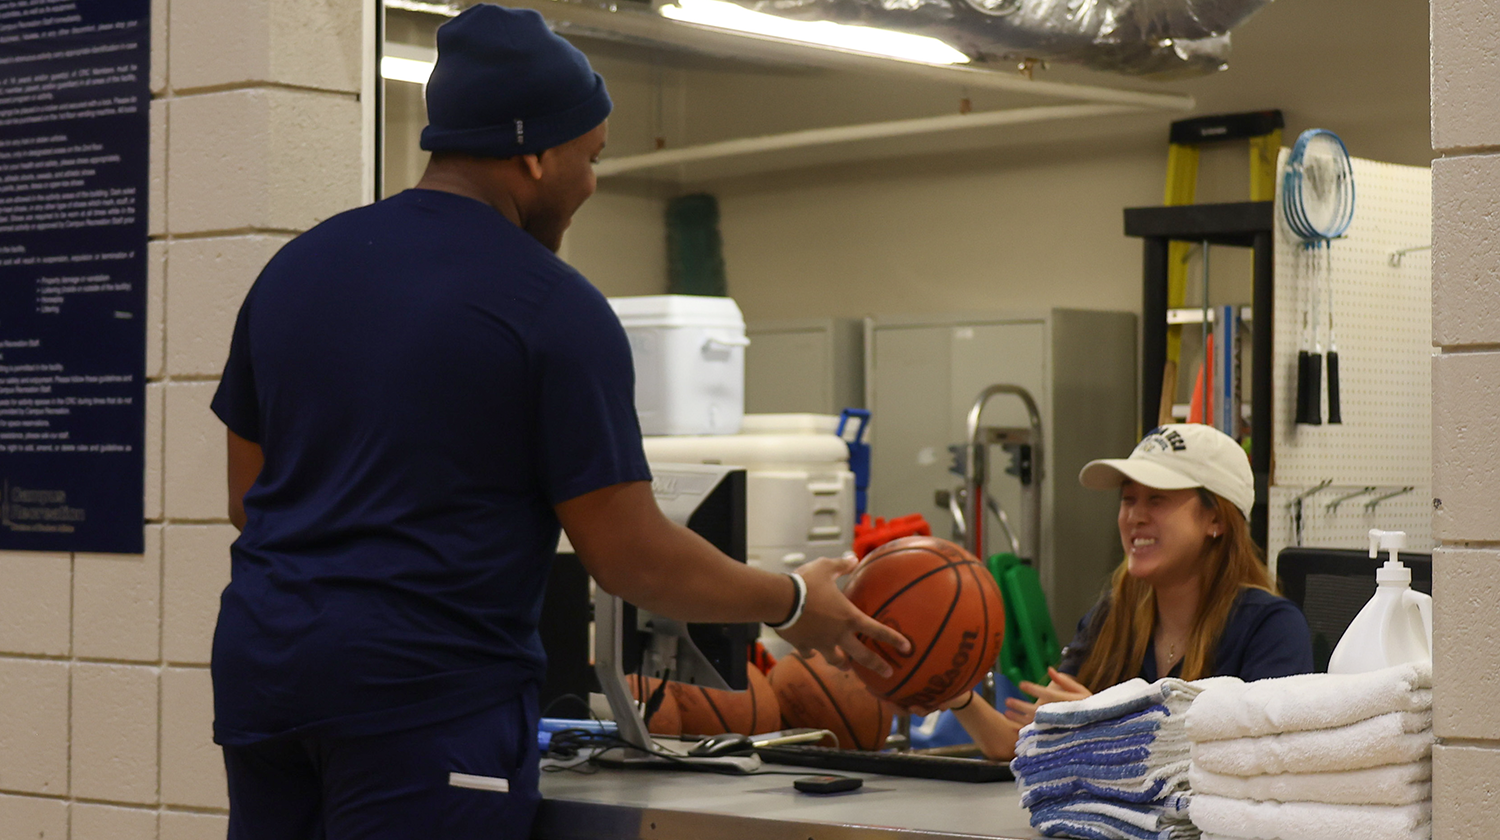 A CRC equipment issue student staff hands a basketball to a client.